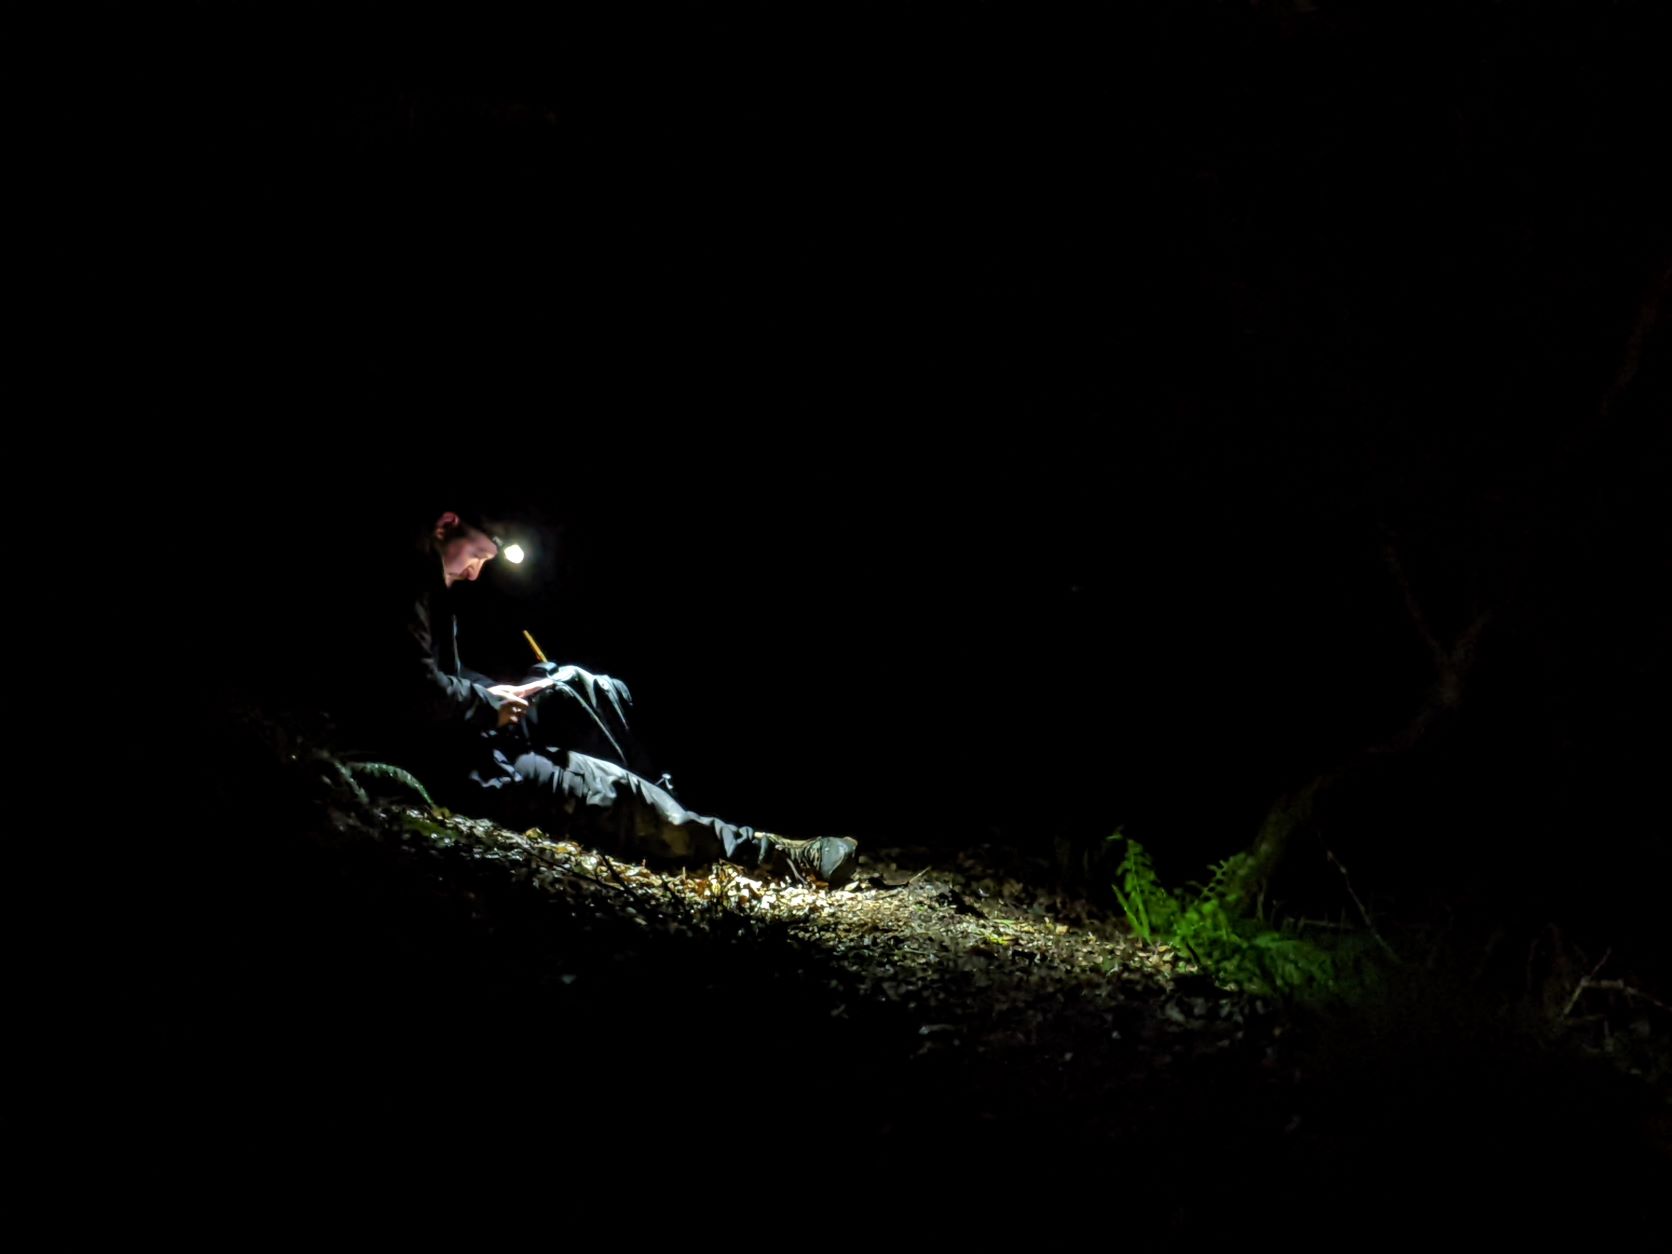 Brogan Pett wearing a head torch while sitting on the ground in the dark